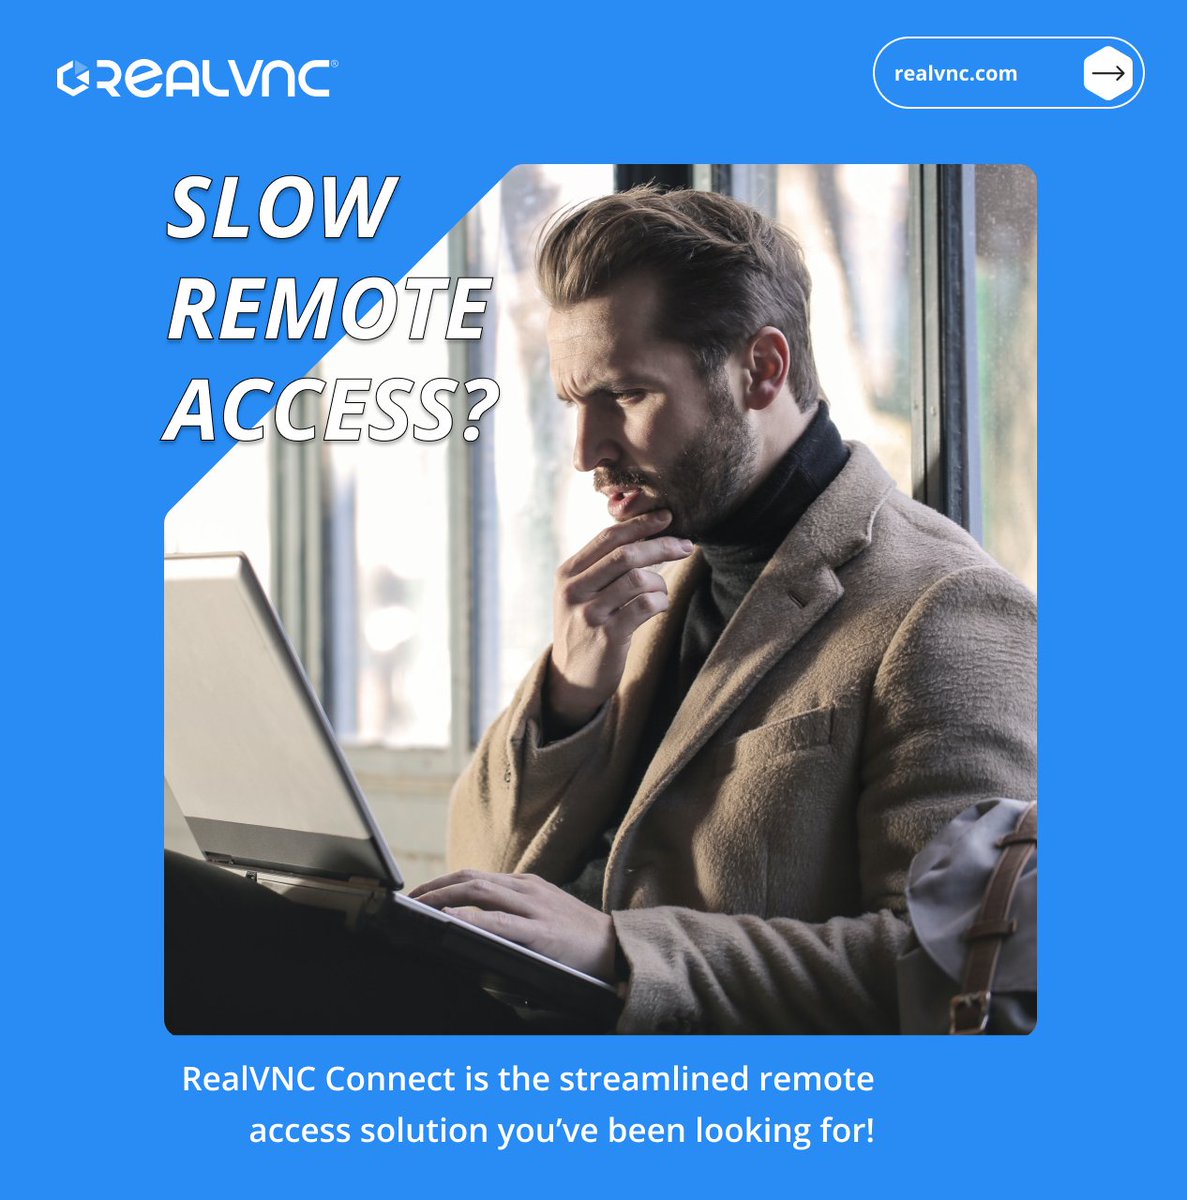 IT managers, are you tired of clunky remote access solutions that slow you down? RealVNC Connect is the modern, streamlined solution you've been looking for.

#remoteaccess #ITManager